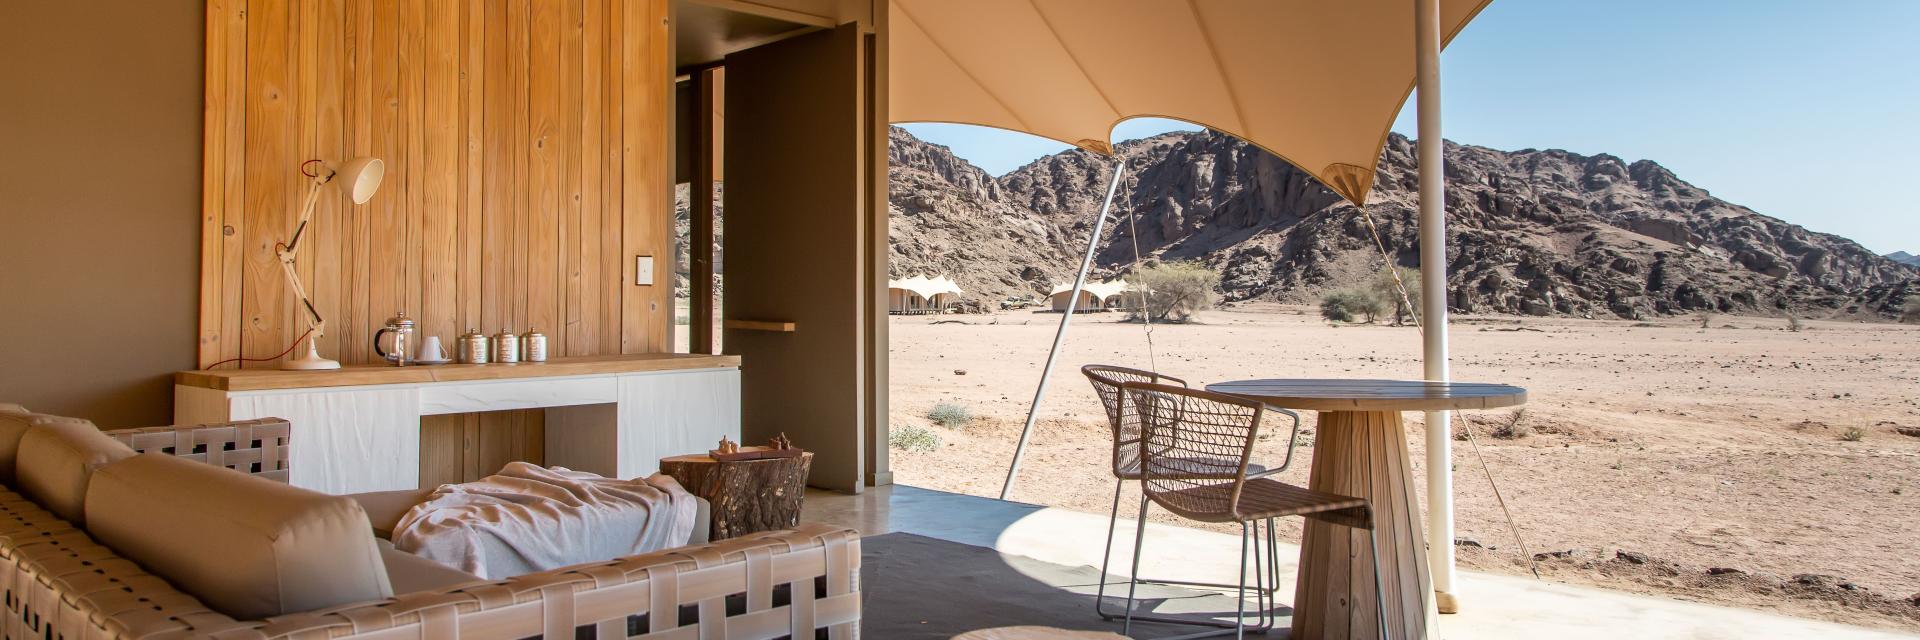 Enjoy the serene views from the tent lounge.